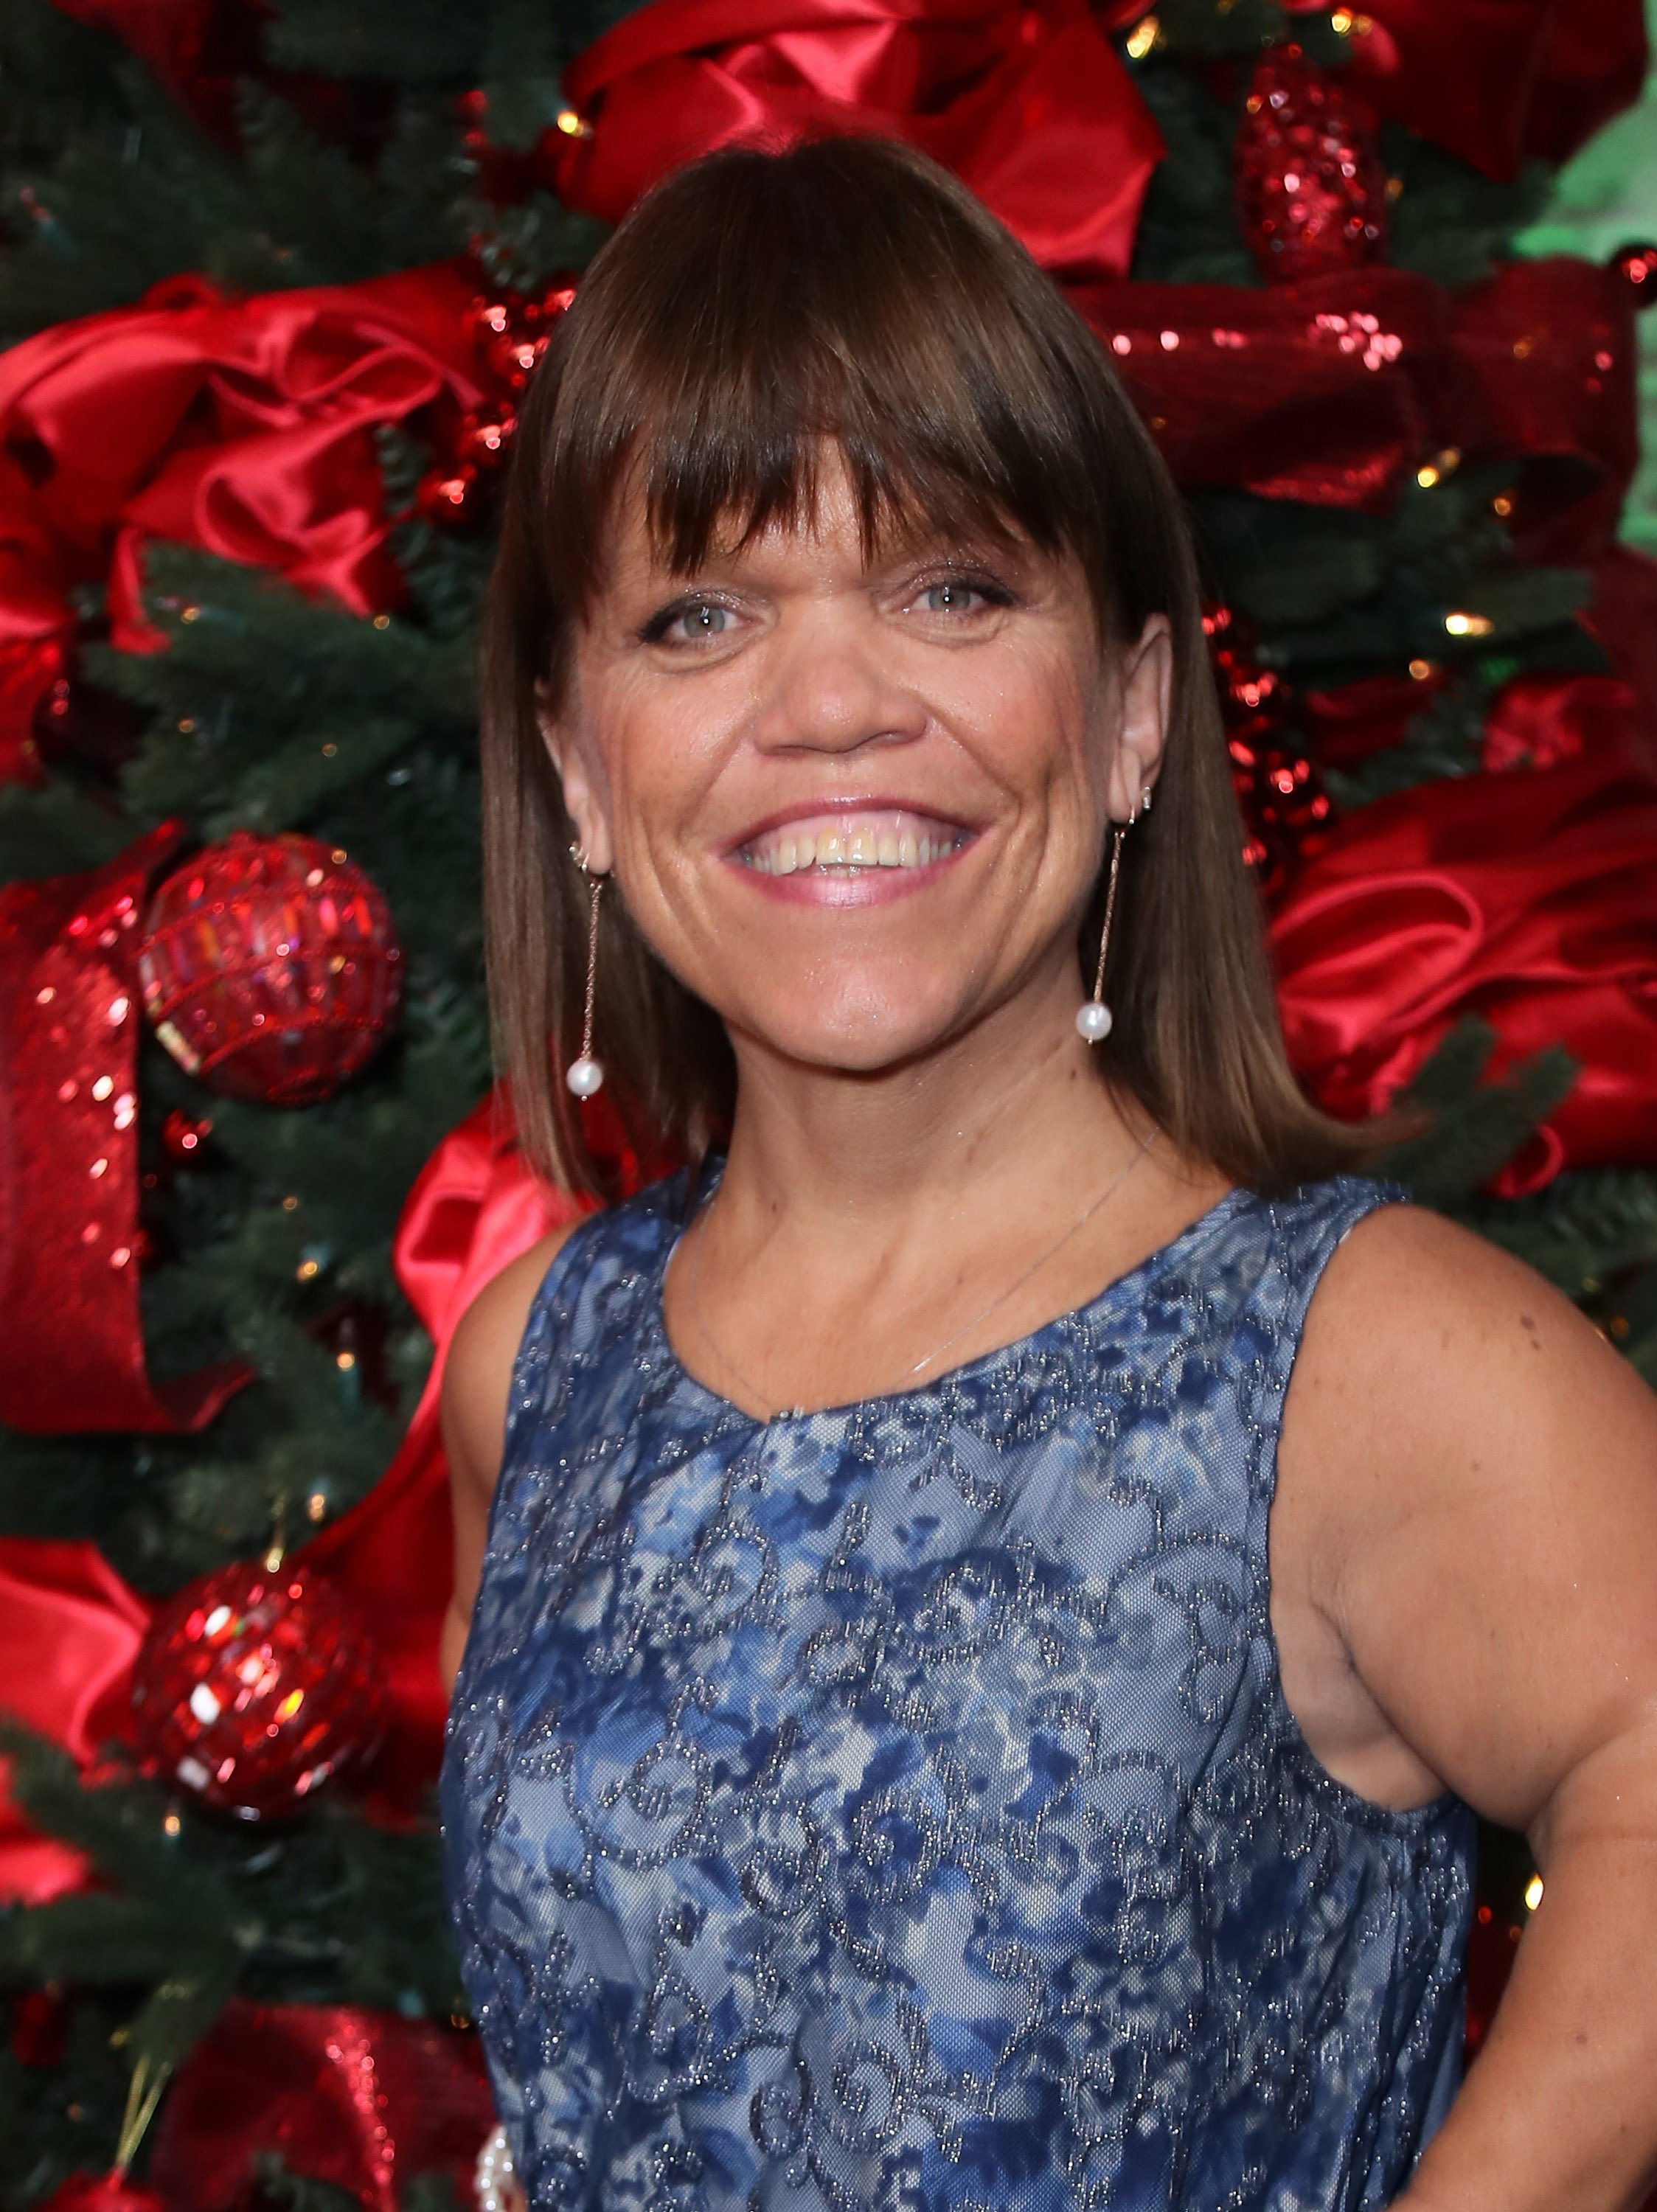 "LPBW" star Amy Roloff is engaged to Chris Marek, after ending her marriage with Matt Roloff in 2016. | Photo: Getty Images